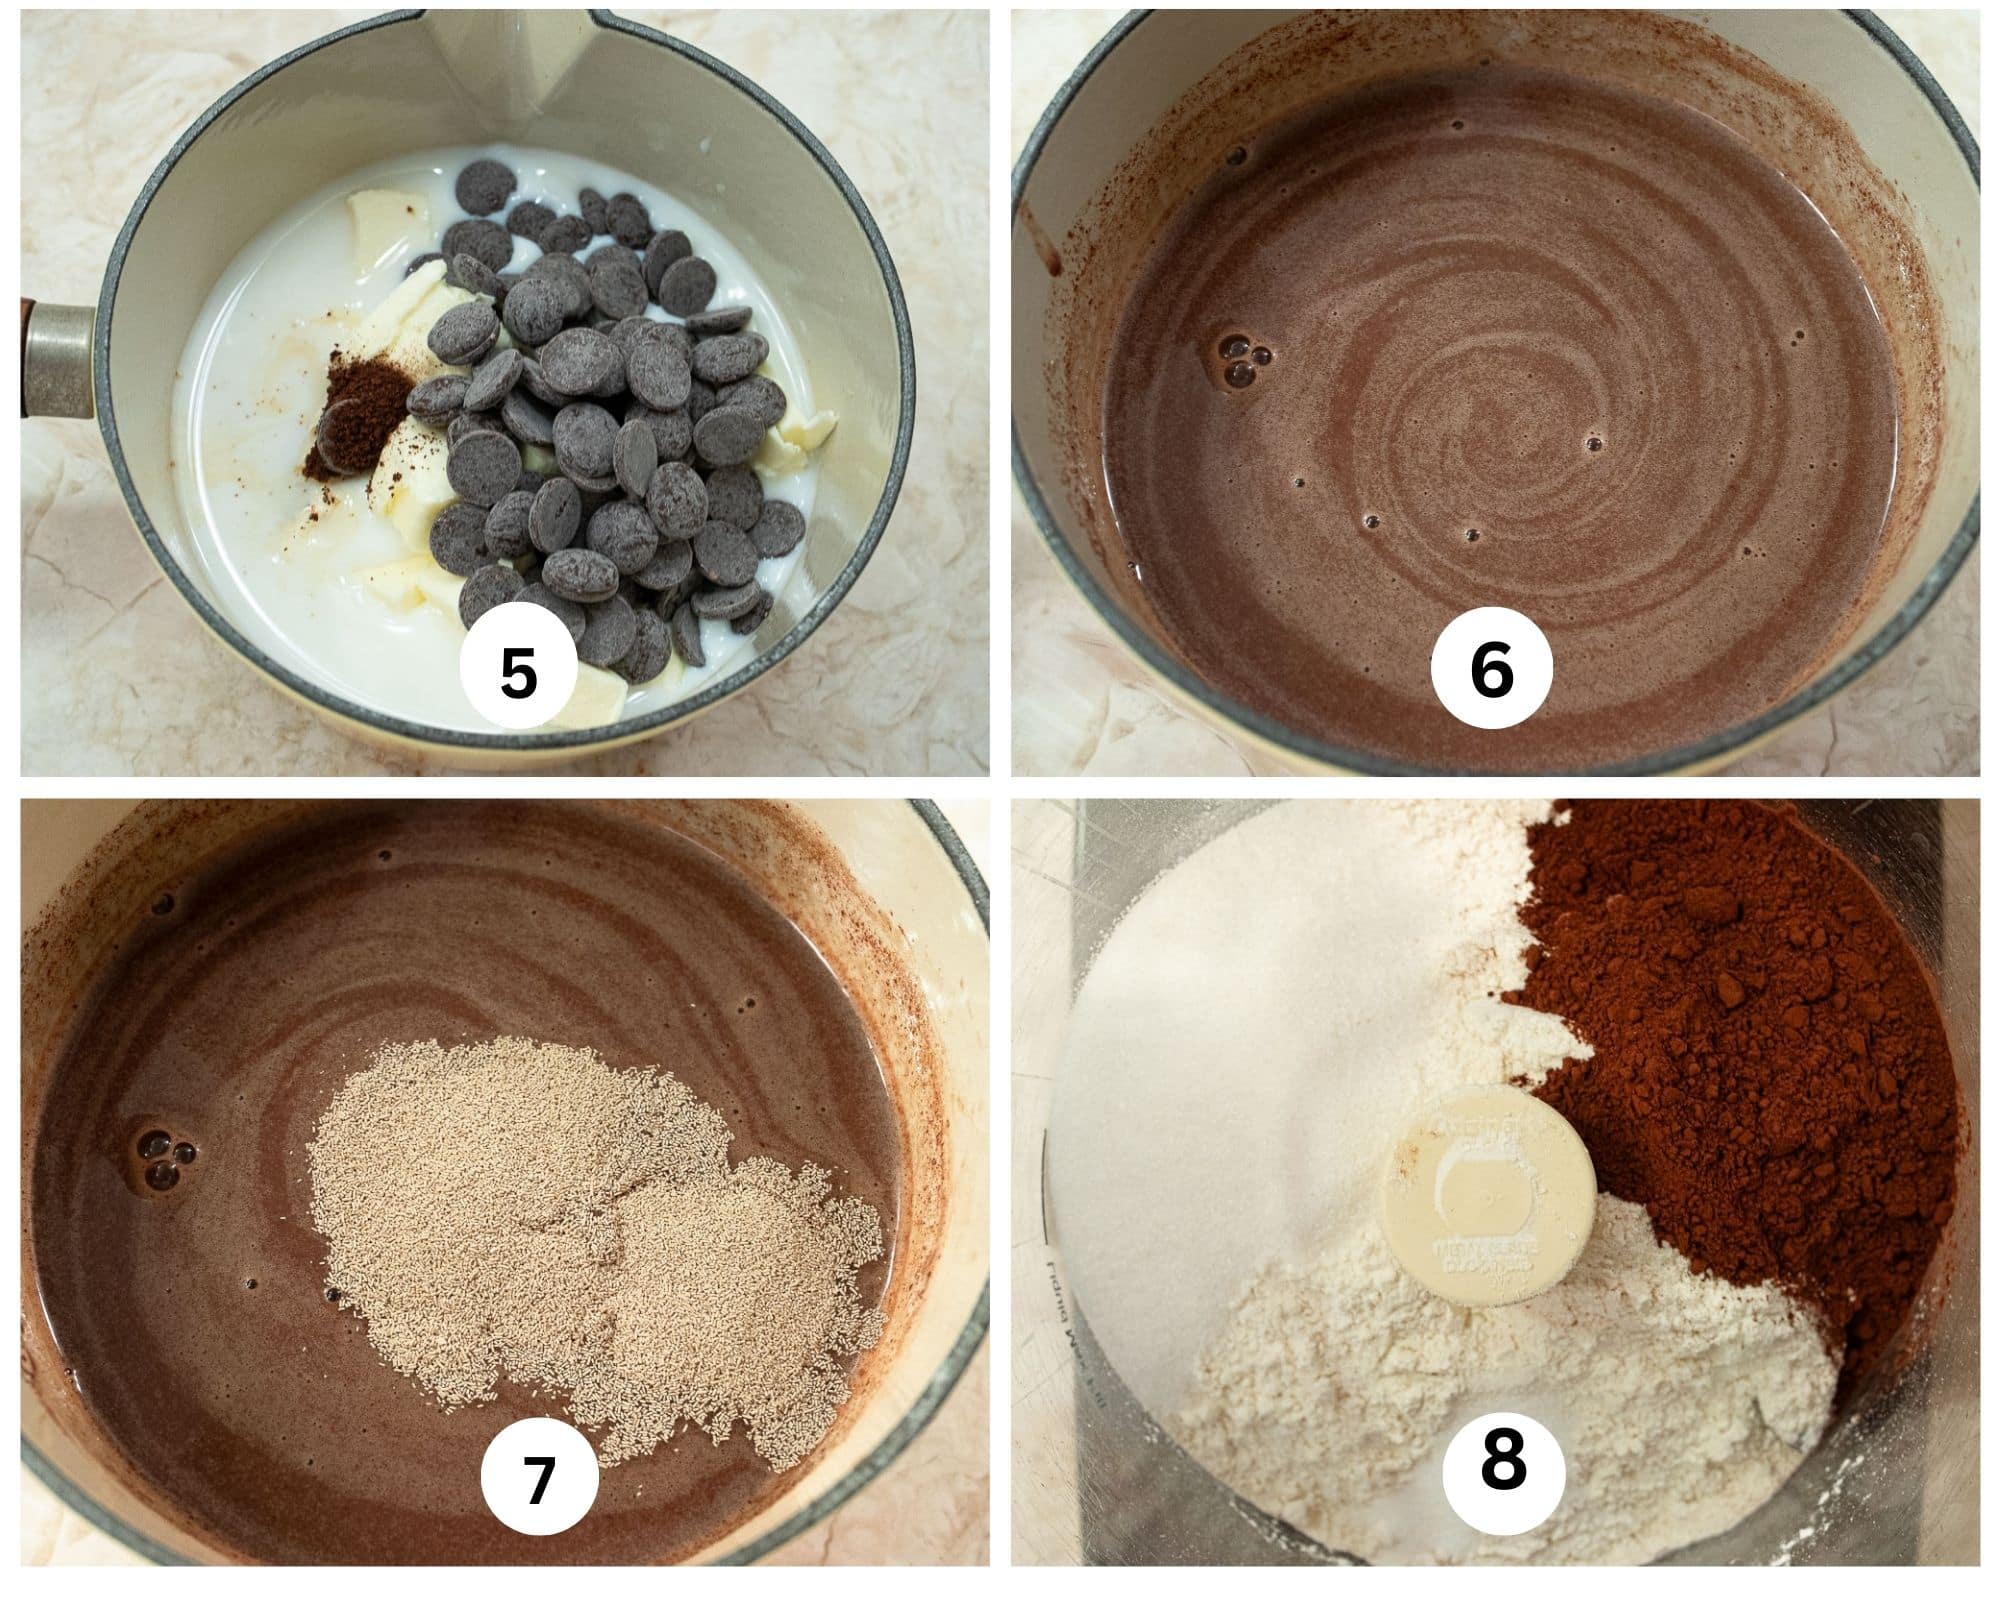 This collage shows the milk, butter, chocolate and coffe in a saucepan, heated to liquid, yeast added and the dry ingredients in a processor bowl.